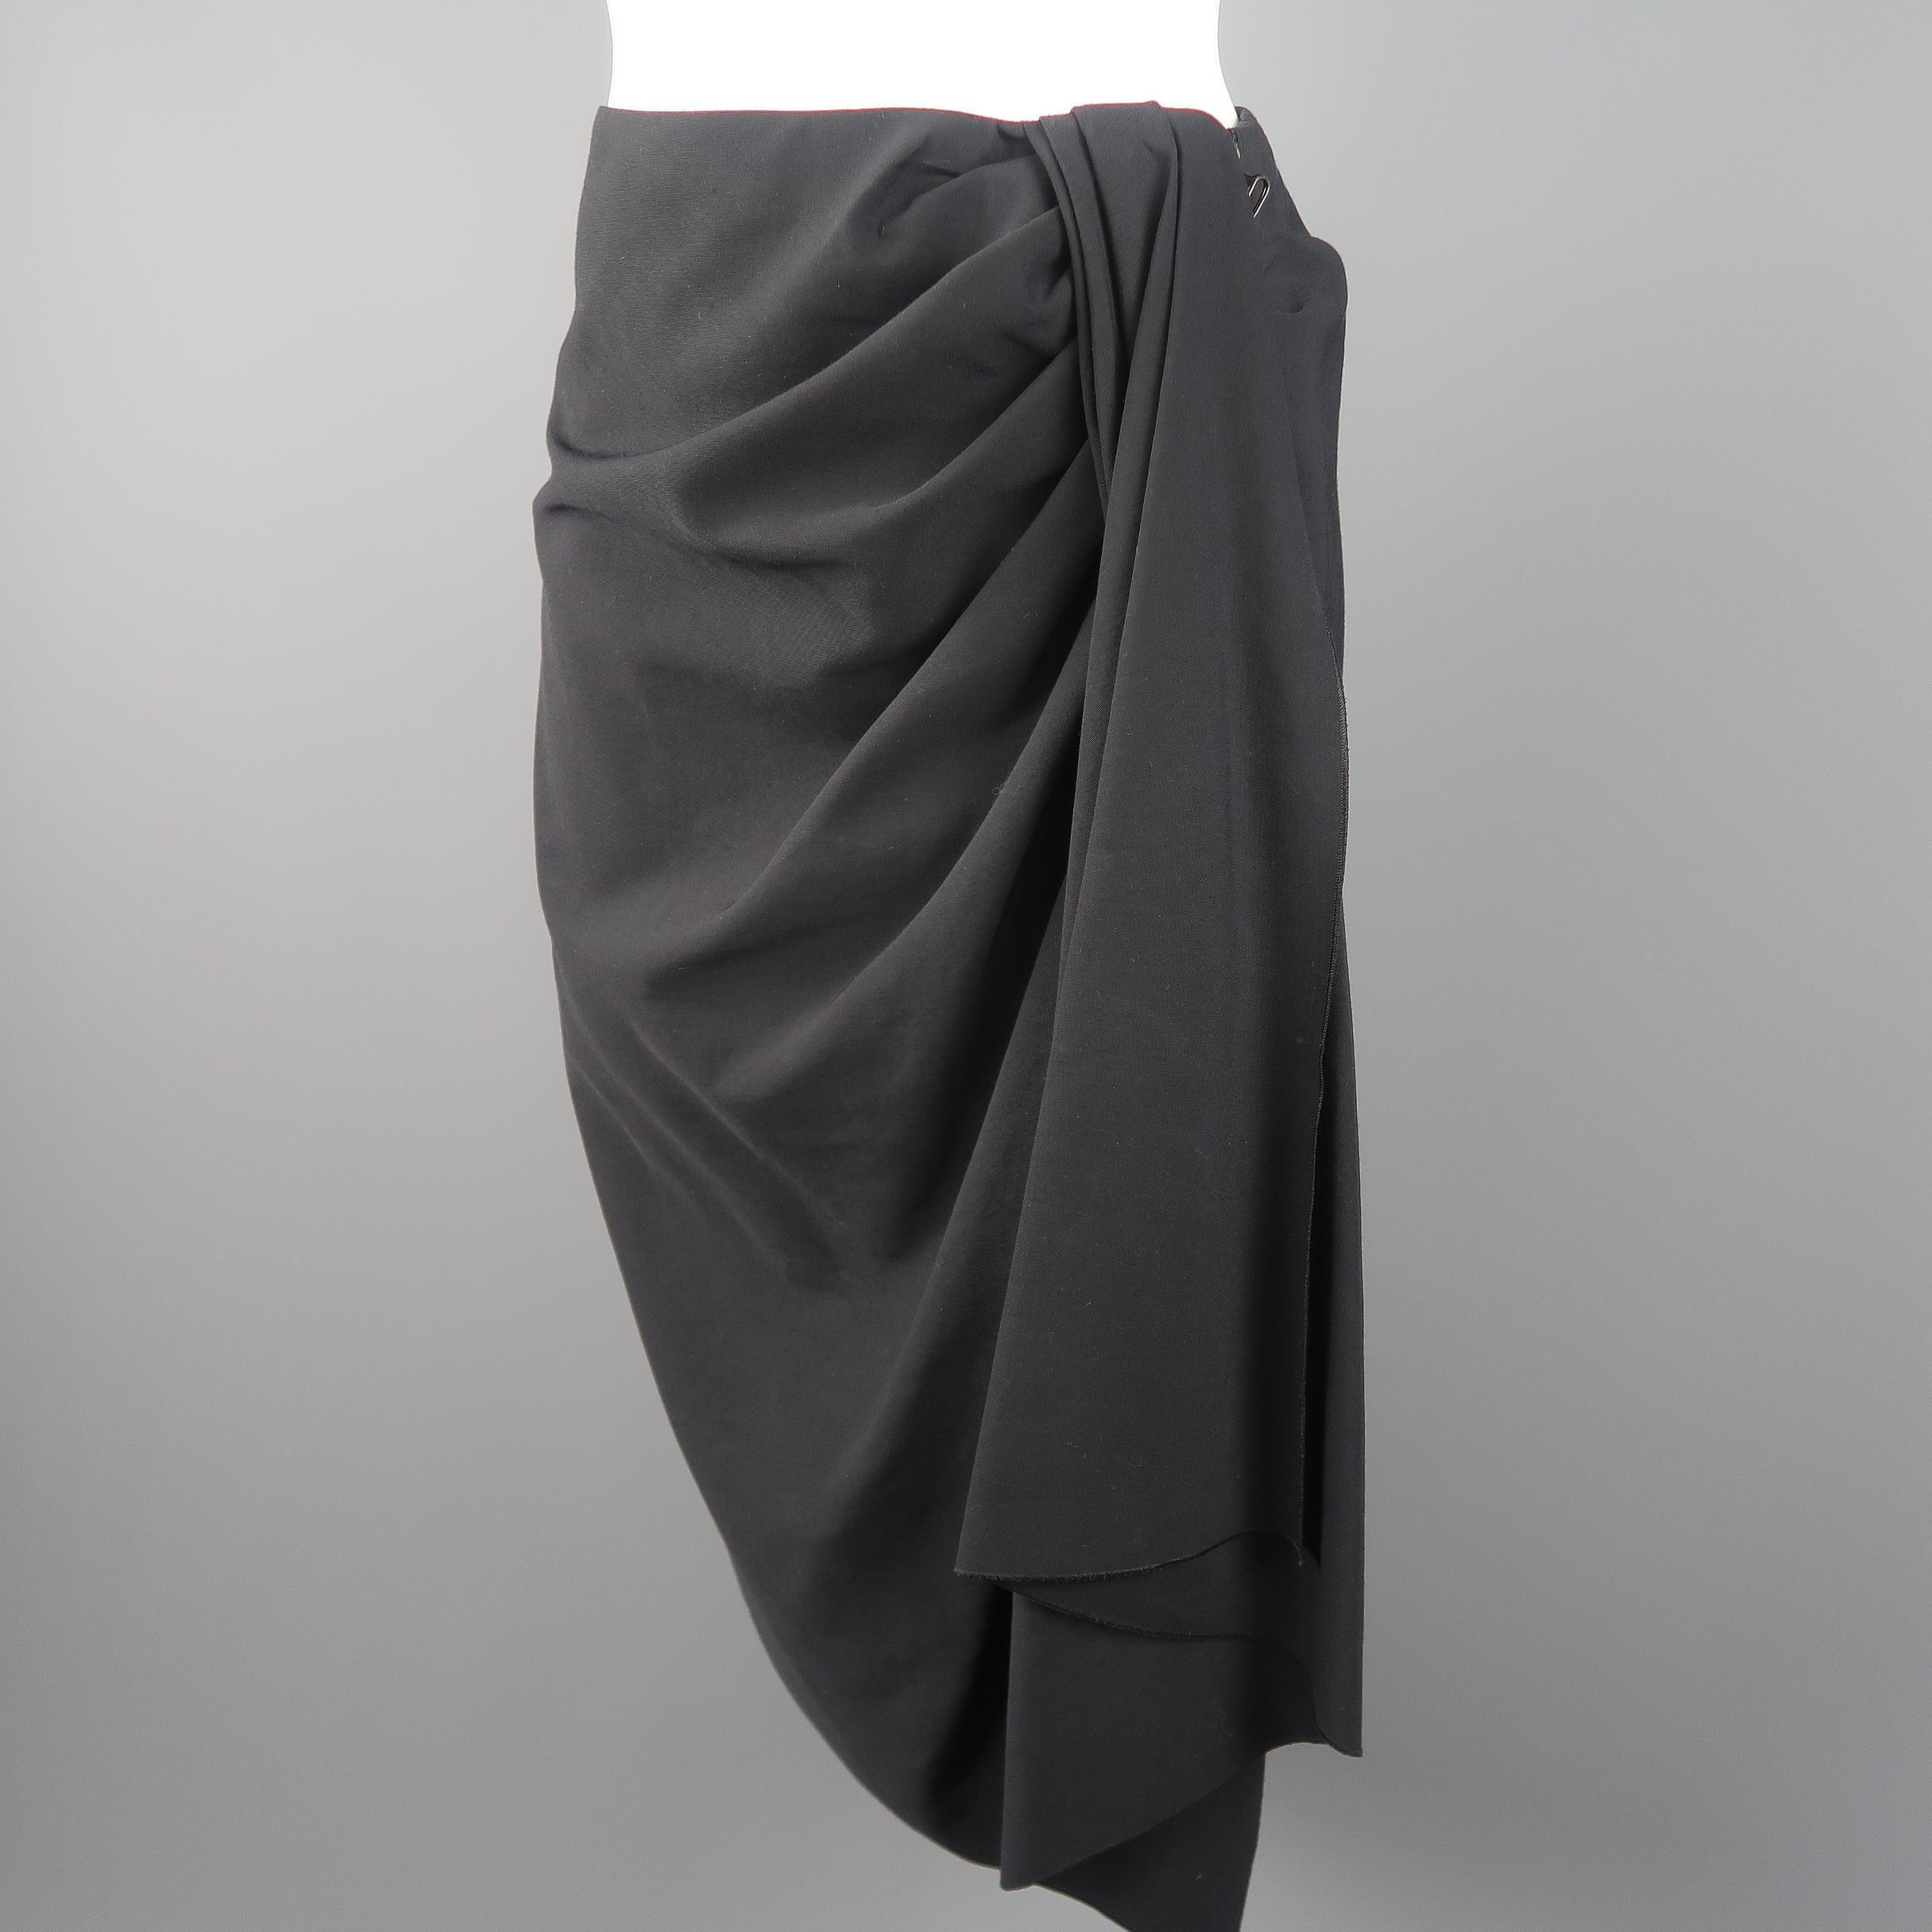 Lanvin asymmetrical skirt, come in wool in black tone and frontal draped detail, with exposed zipper. Fall / winter 2007. Made in France.
 
Good  Pre-Owned Condition.
Marked: 40
 
Measurements:
 
Waist: 30 in.
Hip: 40 in.
Length: 30 in.